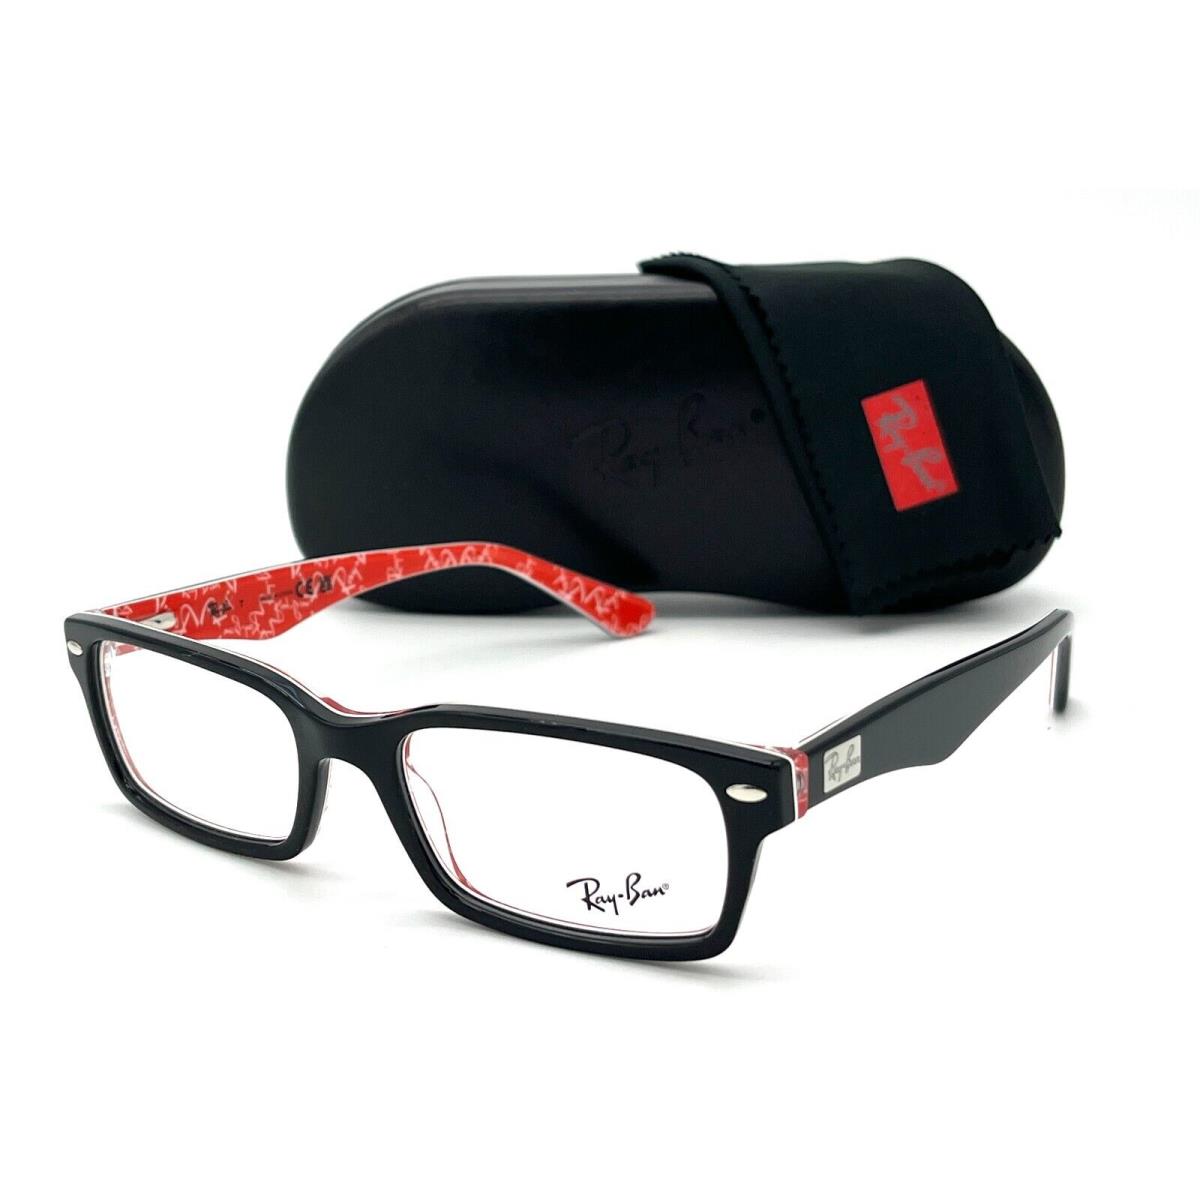 Ray Ban RX5206 2479 Black on Texture Red / Demo Lens 52mm Eyeglasses RB5206 - Frame: Black on Texture Red